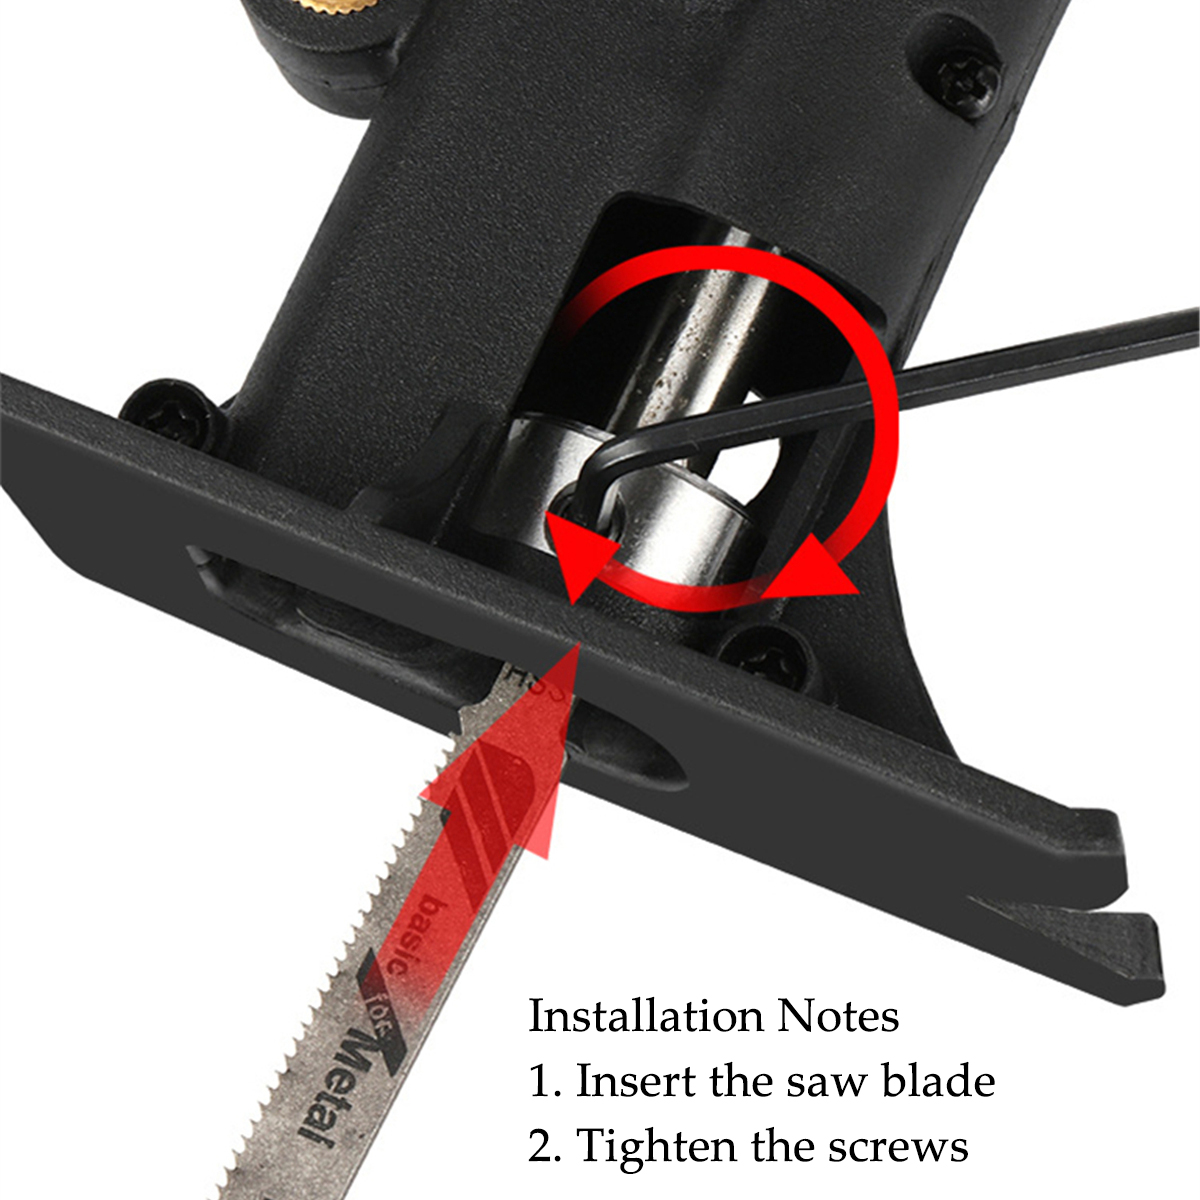 Reciprocating-Saw-Attachment-Adapter-Change-Electric-Drill-Into-Reciprocating-Saw-Jig-Saw-Woodworkin-1793120-6